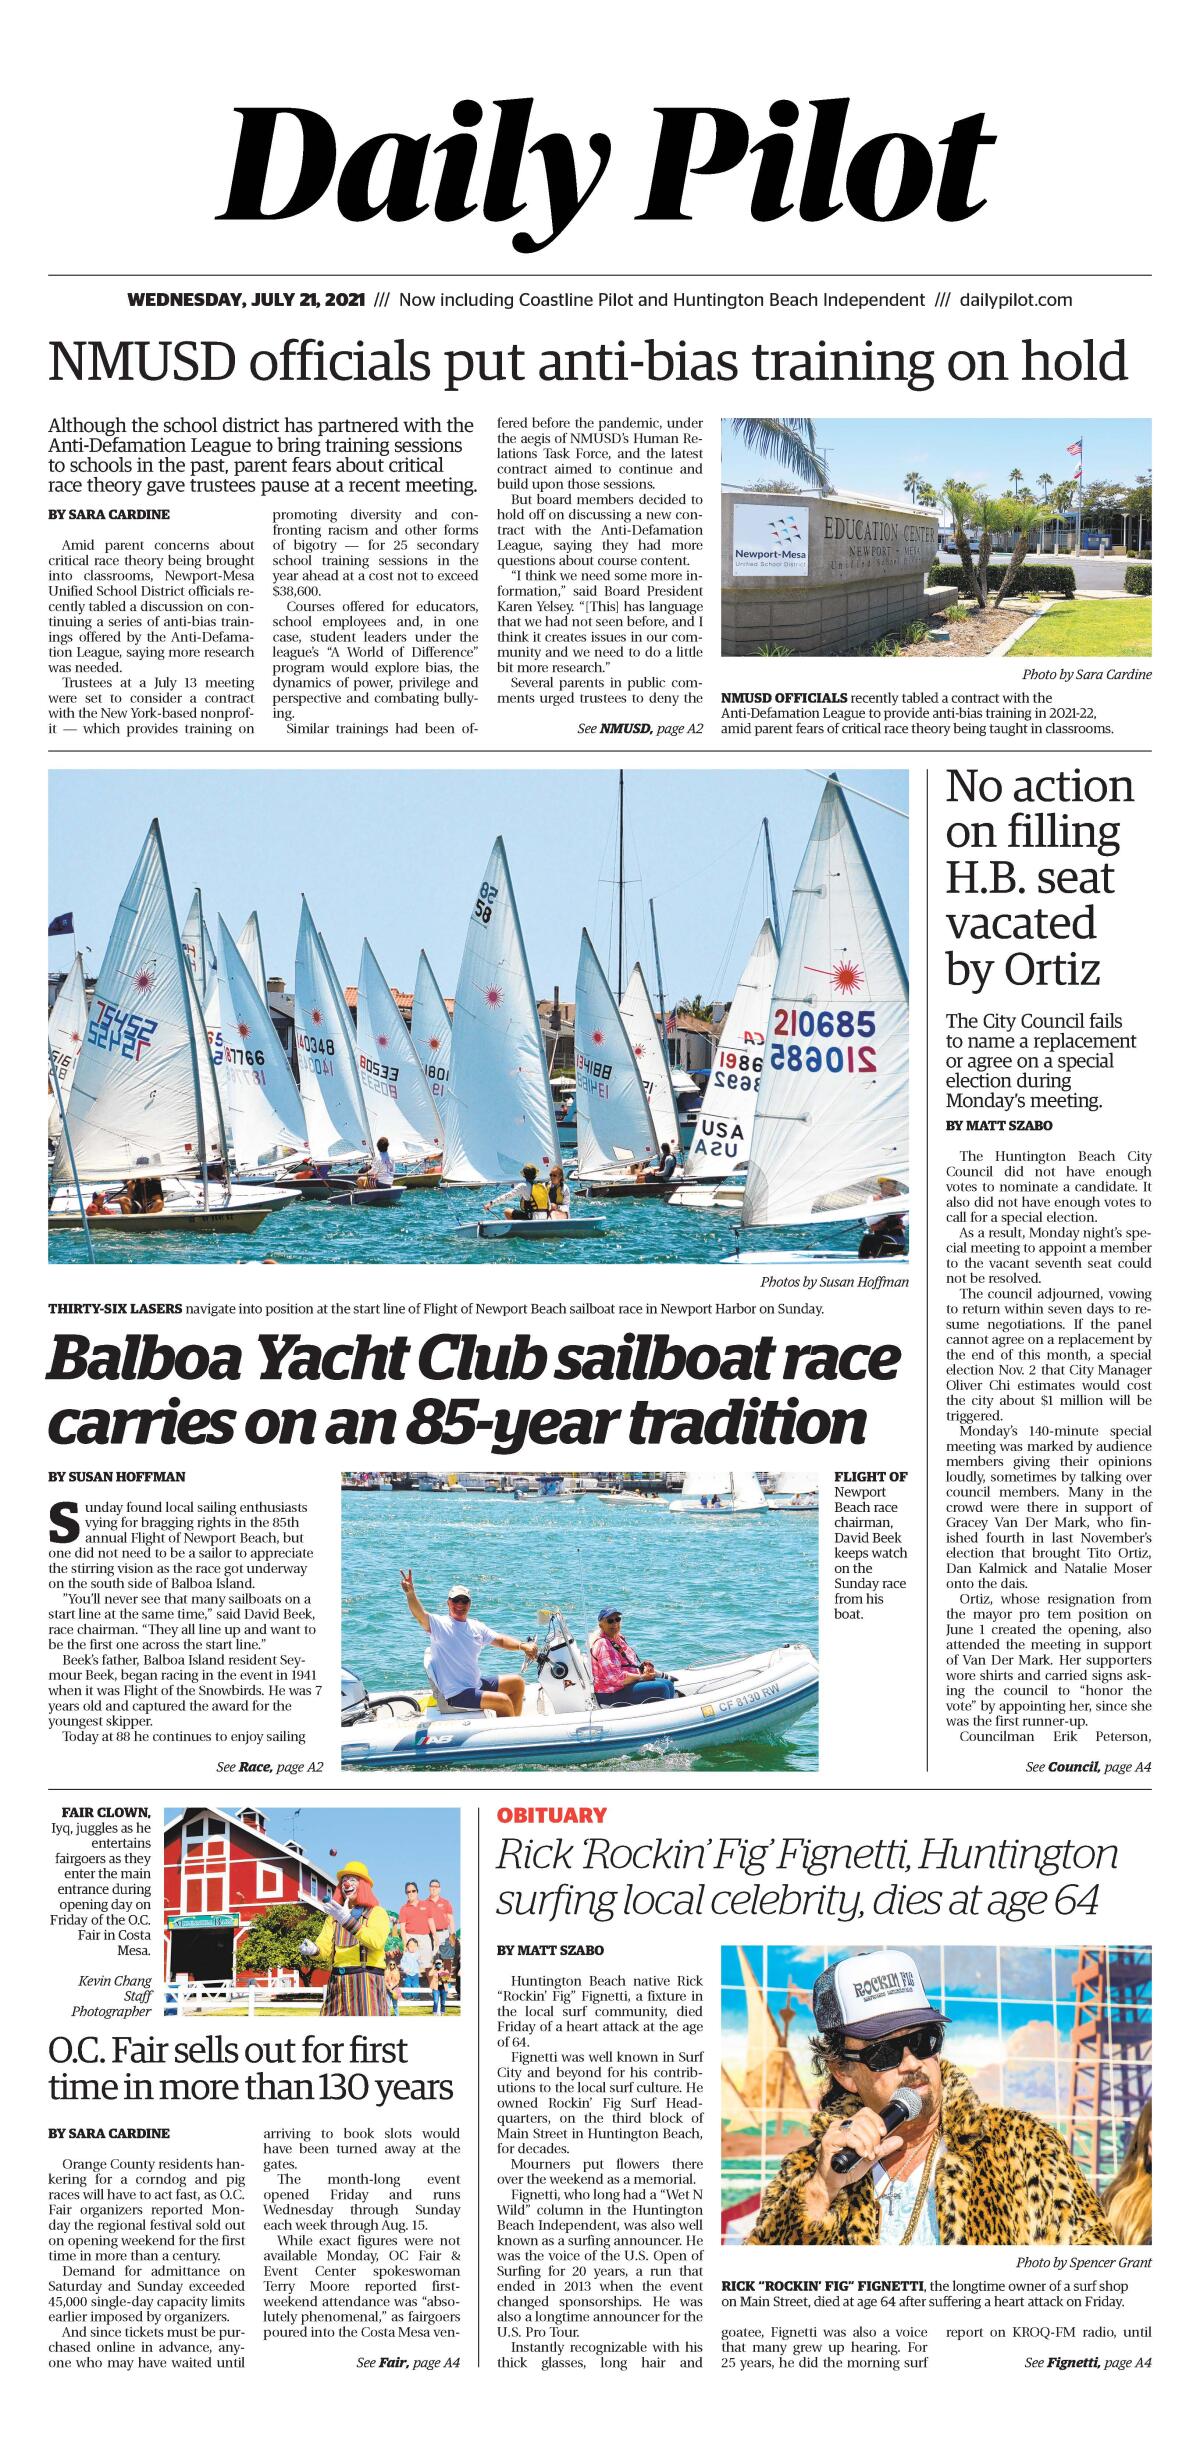 Front page of Daily Pilot e-newspaper for Wednesday, July 21, 2021.